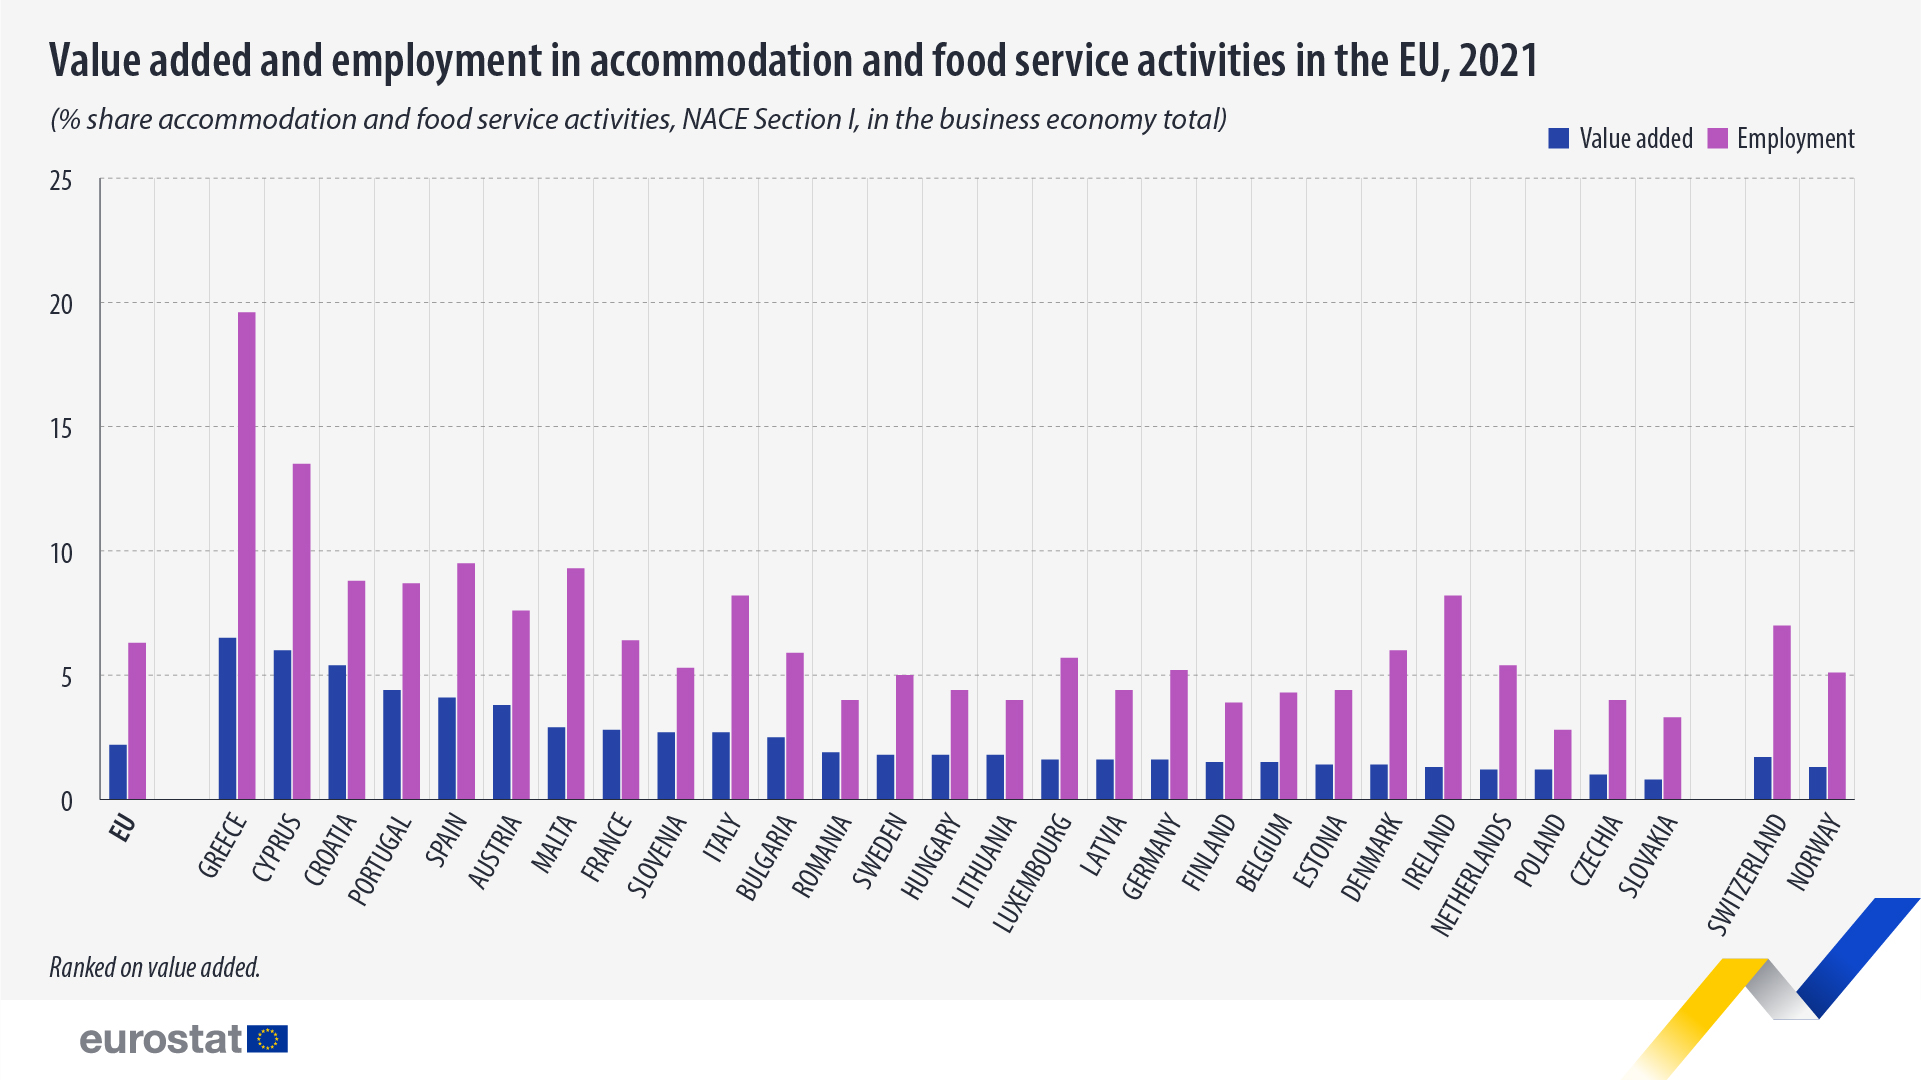 Value added and employment in accommodation and food services, % share in business economy total. Chart. See link to full dataset below.